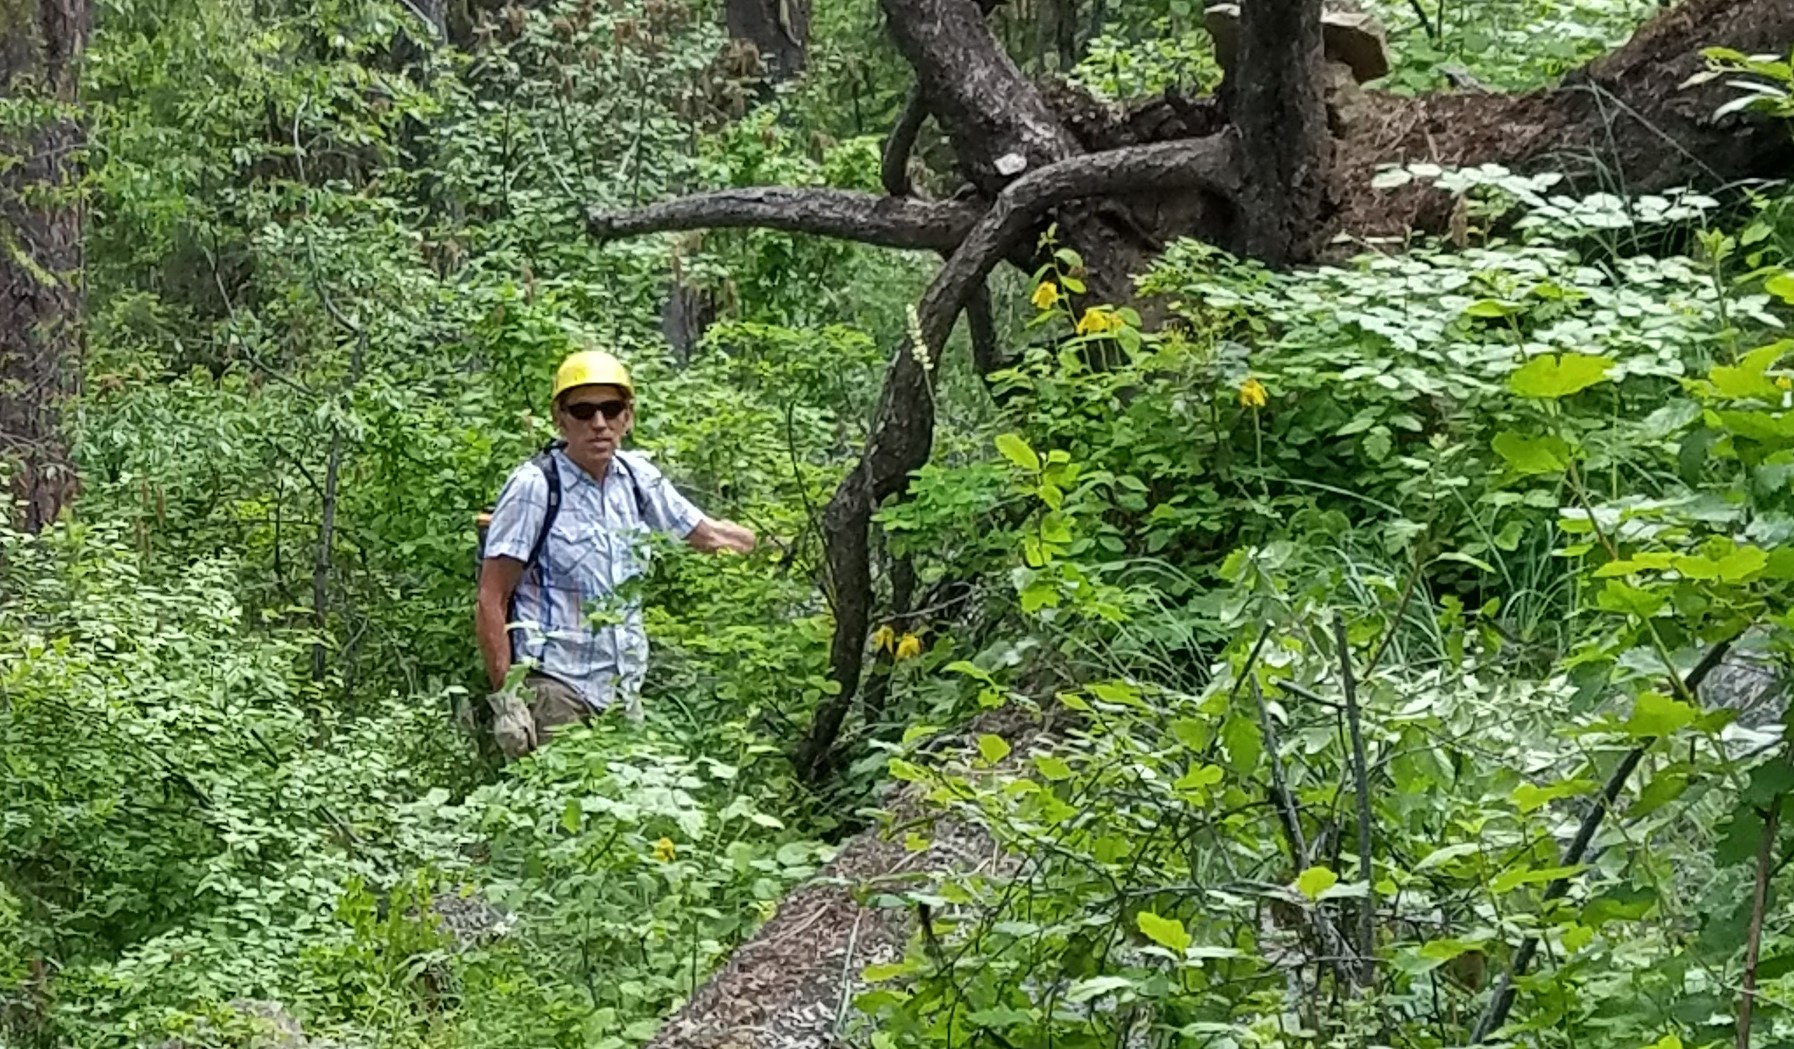 A man with a yellow helmet in the forest.